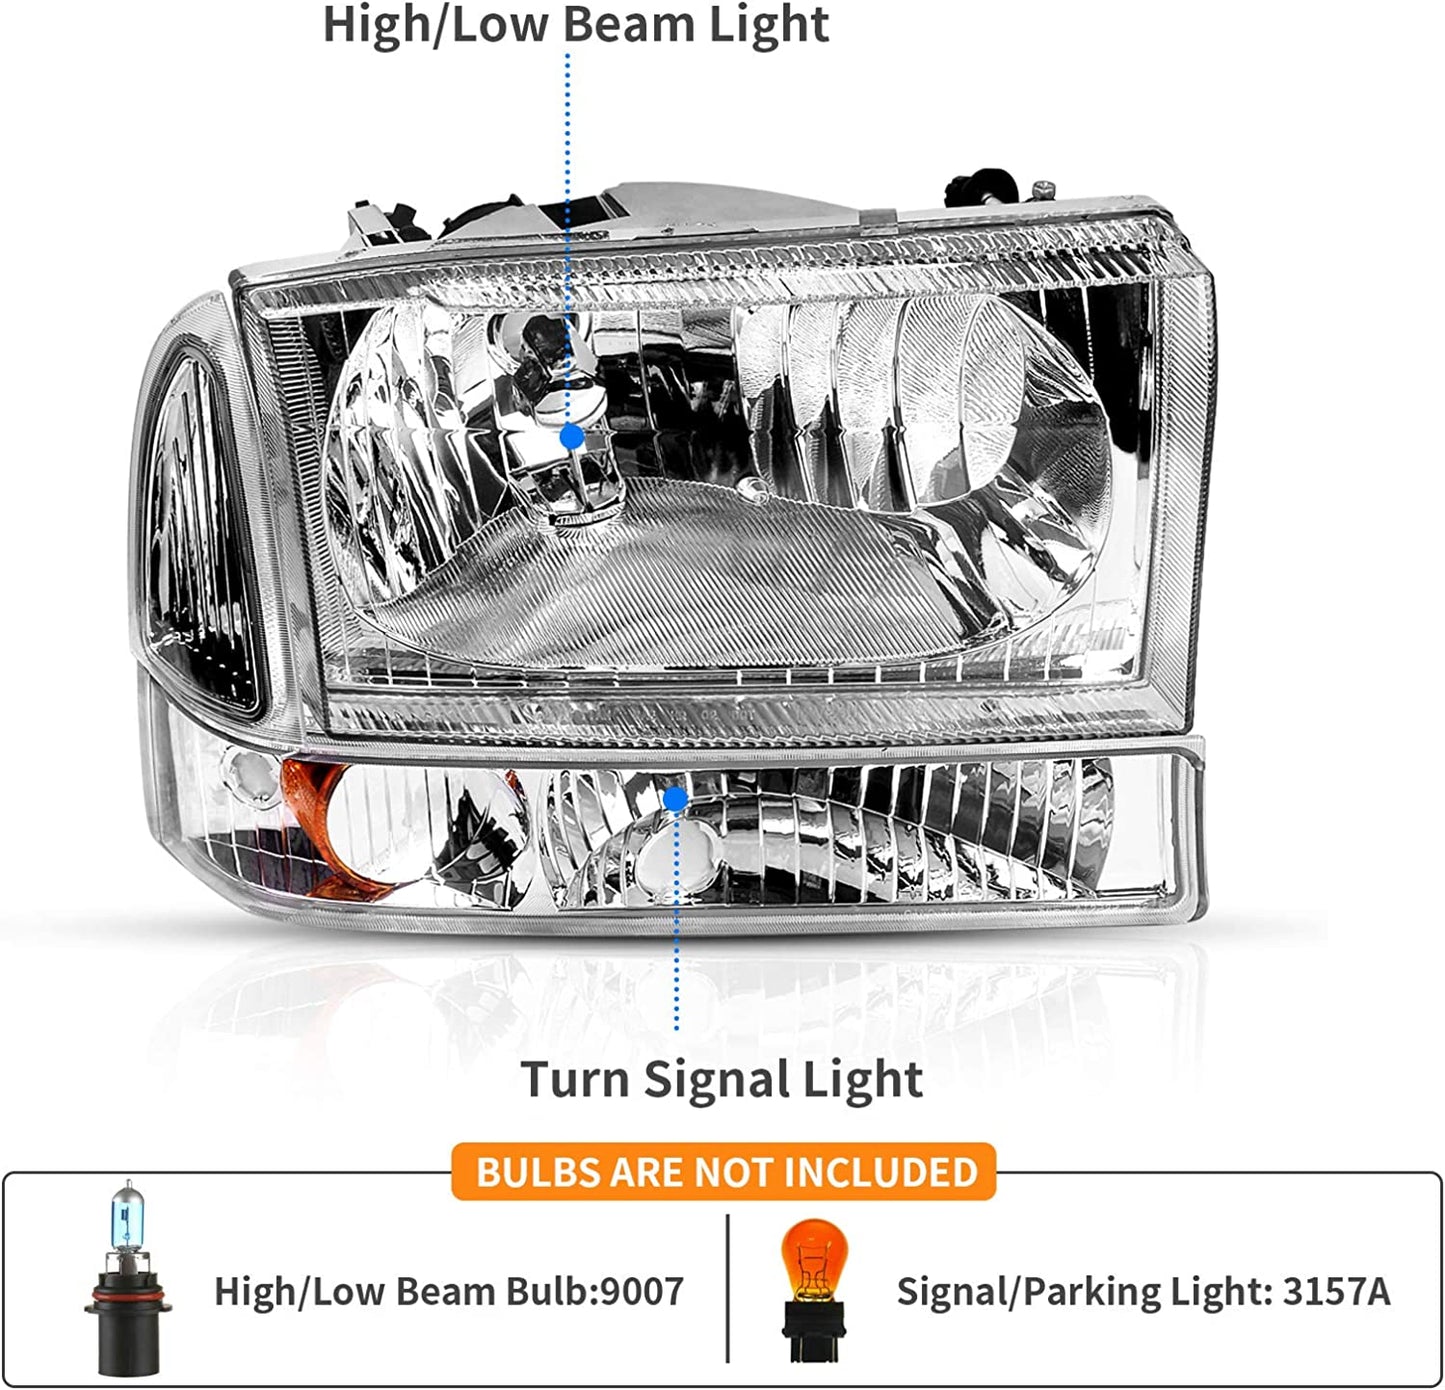 DWVO Headlight Assembly Compatible with Ford F-250 F-350 F-450 F-550 Super Duty Pickup Truck + Signal Lamps, Chrome Housing, Clear Lens, Amber Reflector